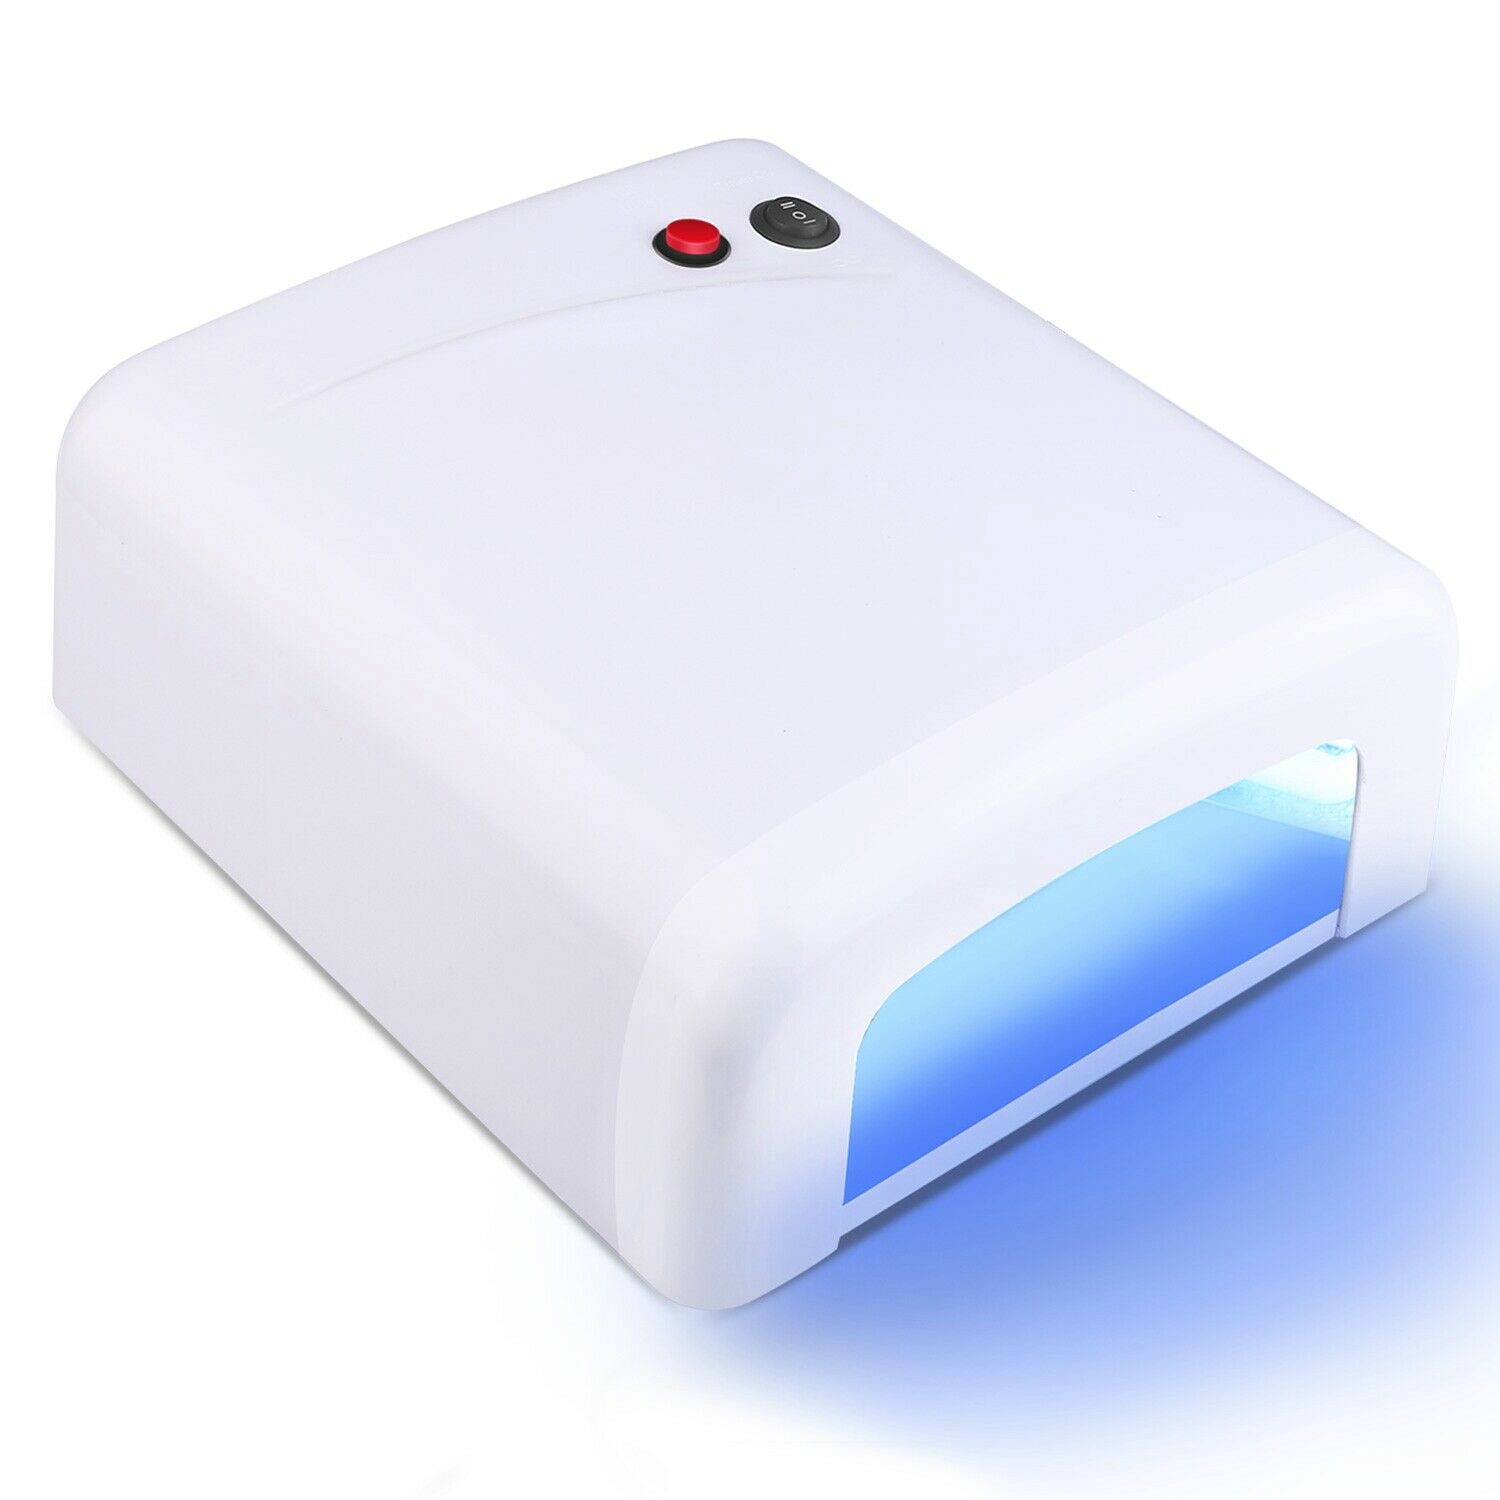 UV Lamp Light for curing - Nails